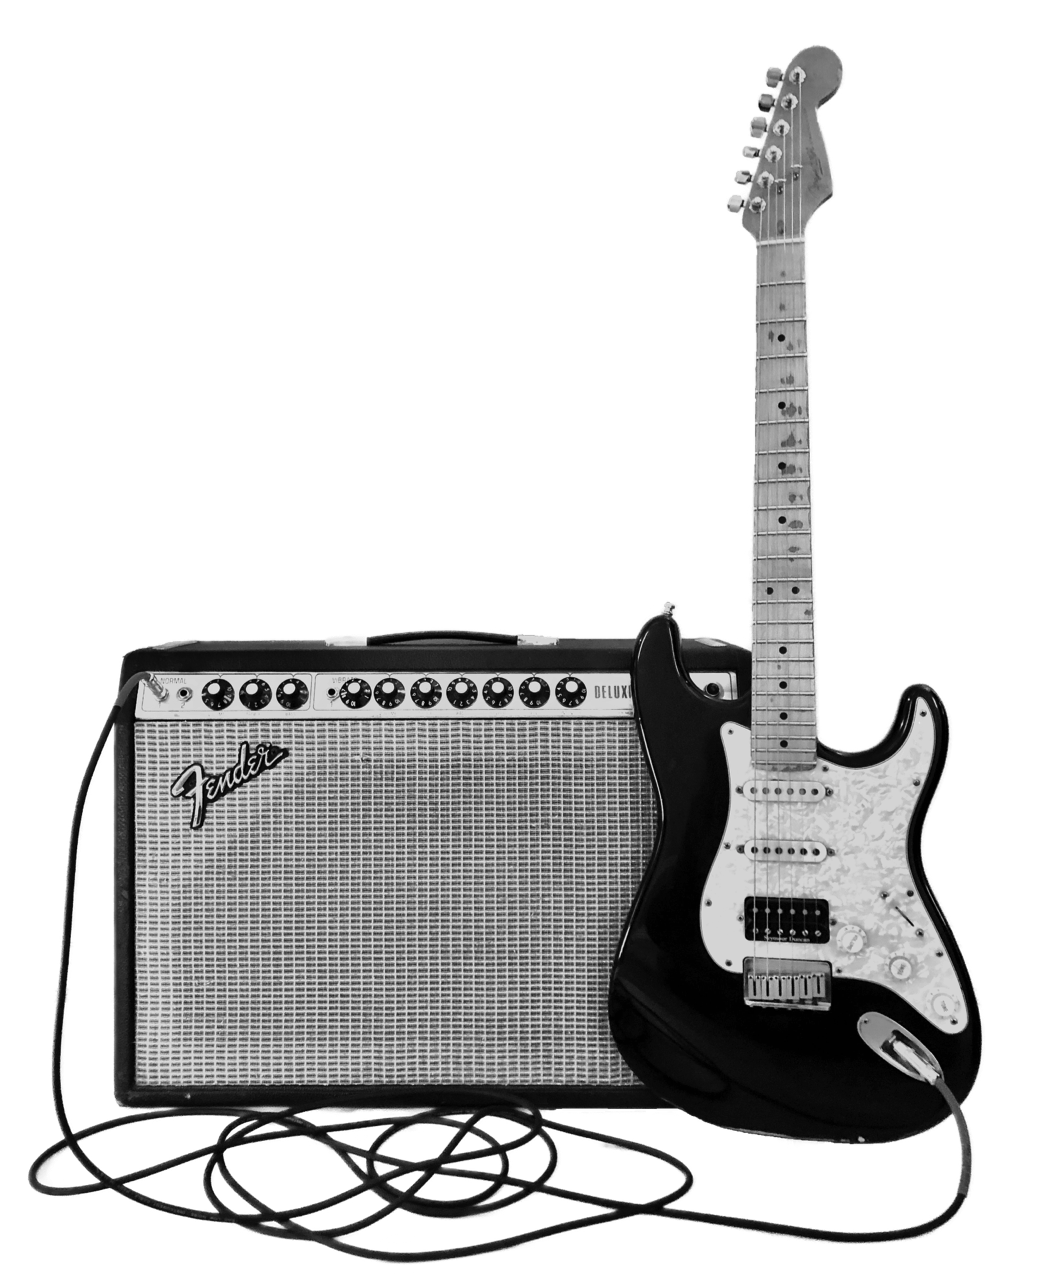 Fender Electric Guitar and Fender Deluxe Amp